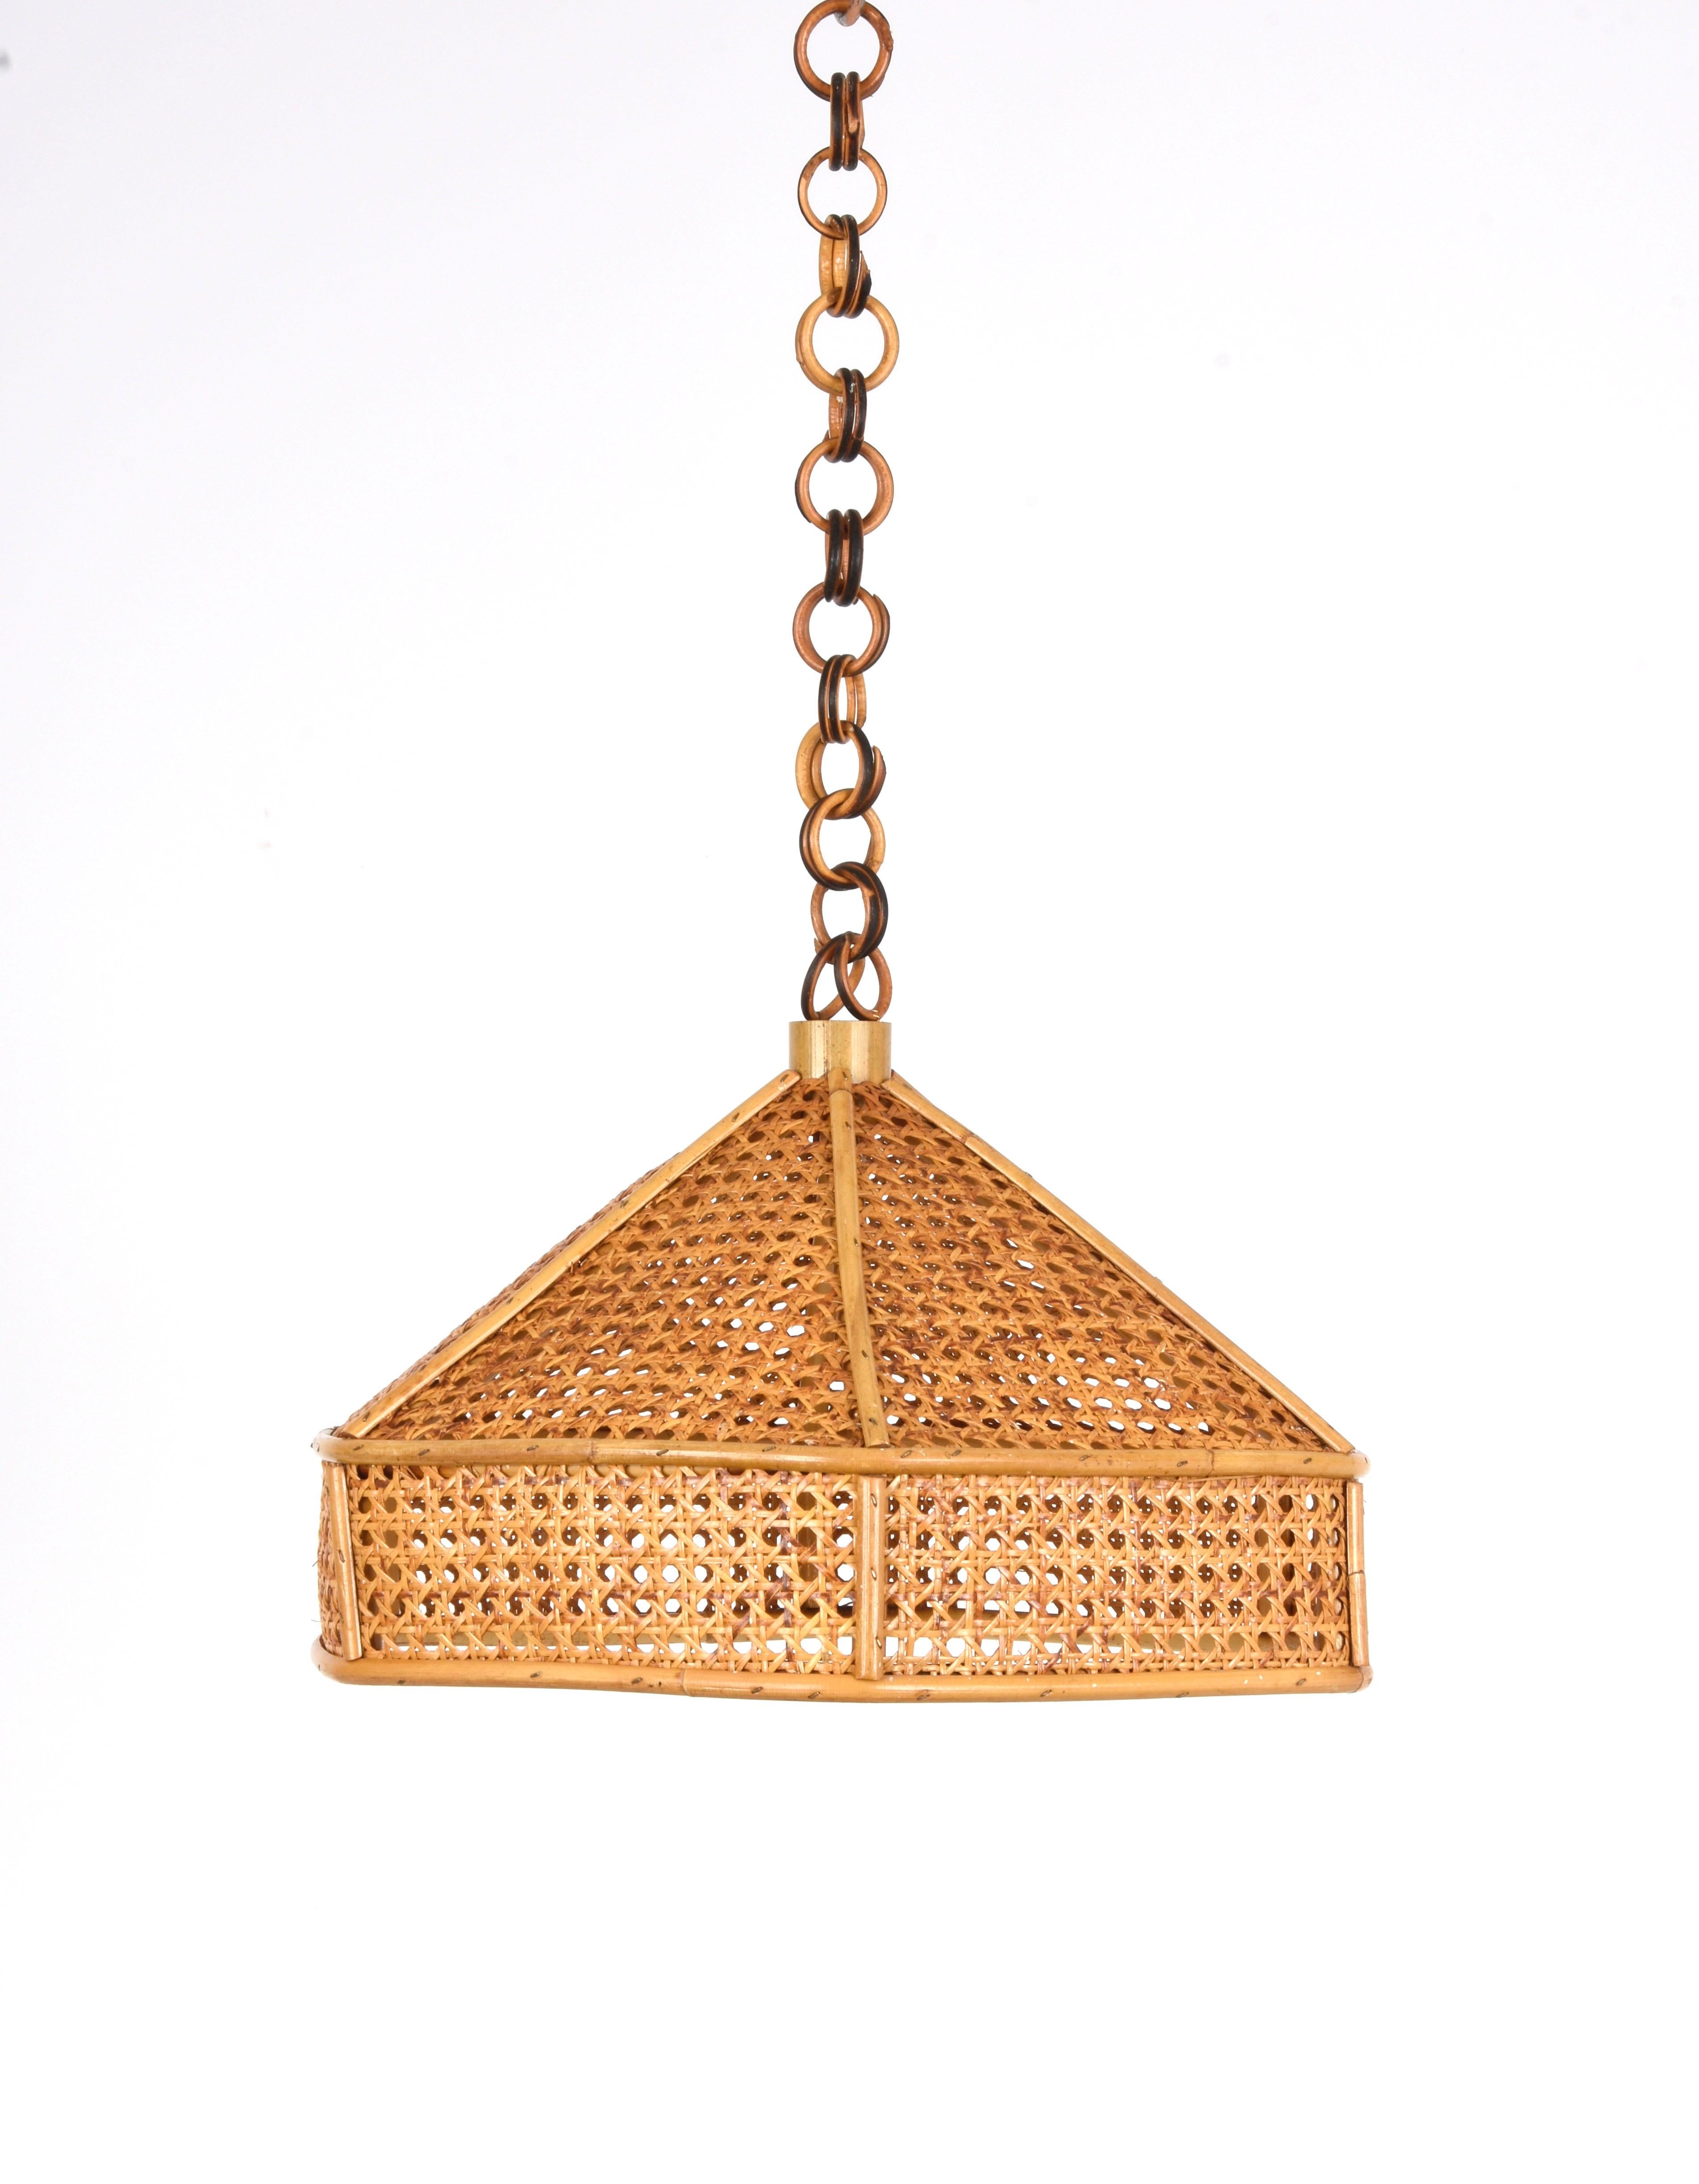 Wonderful rattan and wicker pendant chandelier in the French Riviera style. This incredible piece was made in Italy in the 1960s.

This item is surprising because of the bamboo chapel and a wicker cover structure.

This chandelier is perfect for